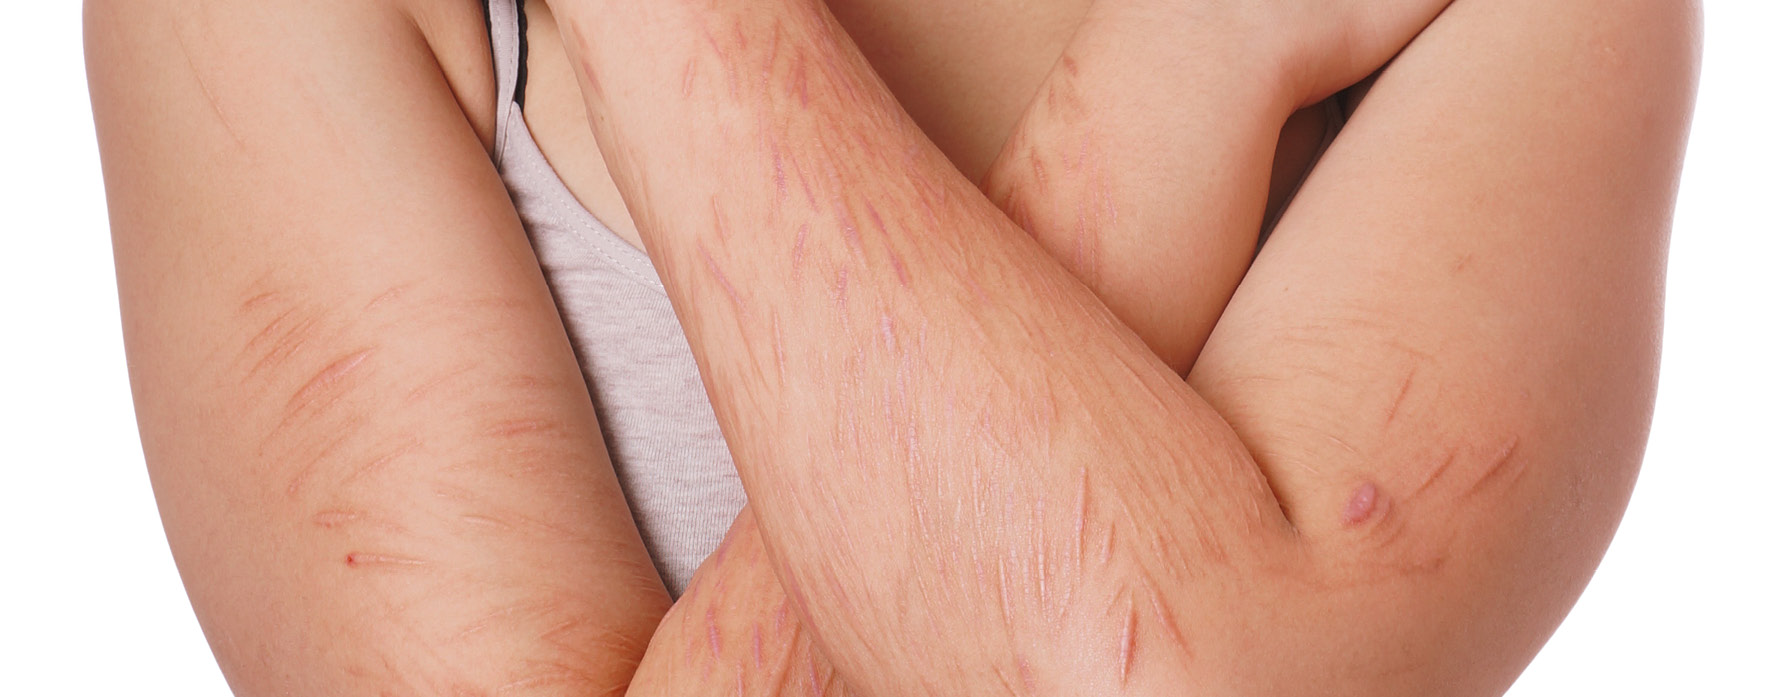 Treating self harm scars - you don't have to live with those scars